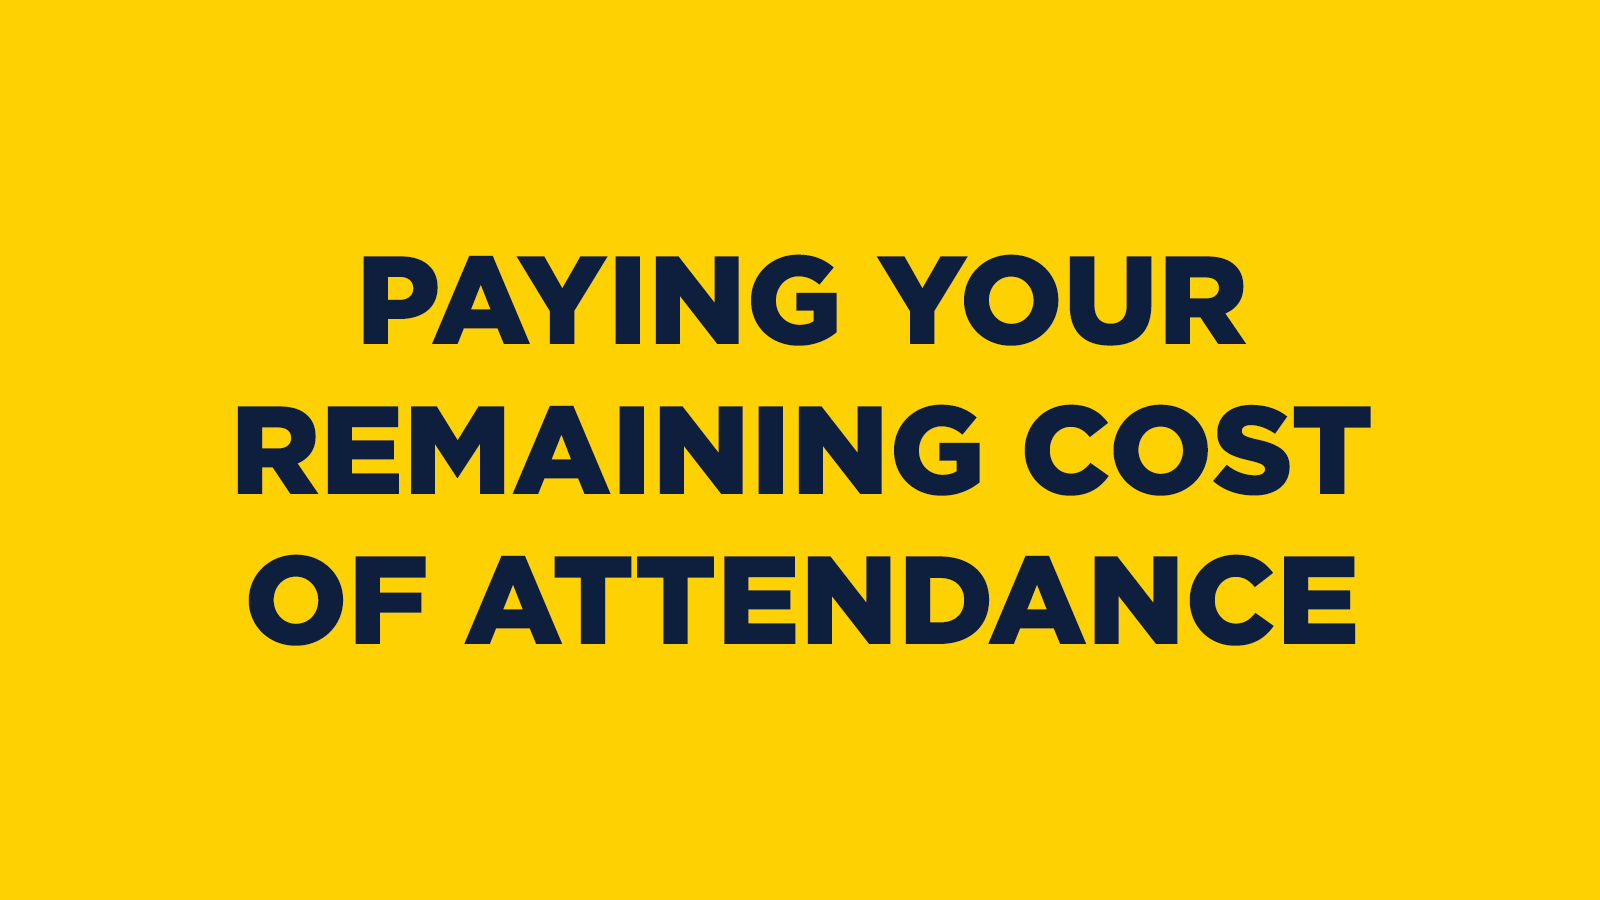 Paying Your Remaining Cost Of Attendance